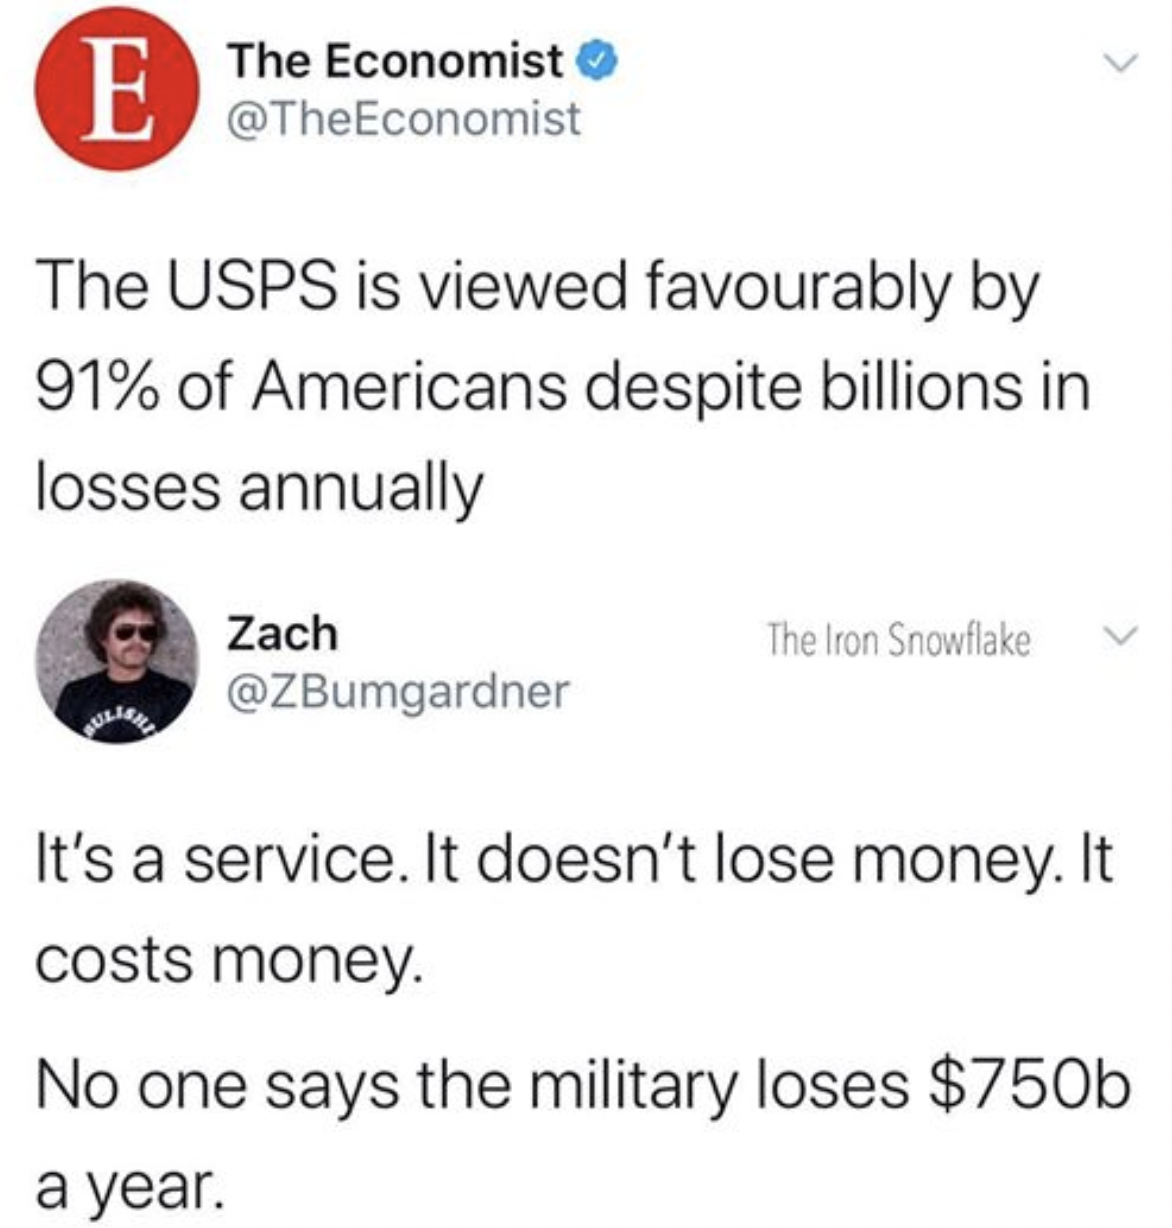 facepalms - usps is a service not a business - E The Economist The Usps is viewed favourably by 91% of Americans despite billions in losses annually Zach The Iron Snowflake It's a service. It doesn't lose money. It costs money. No one says the military lo